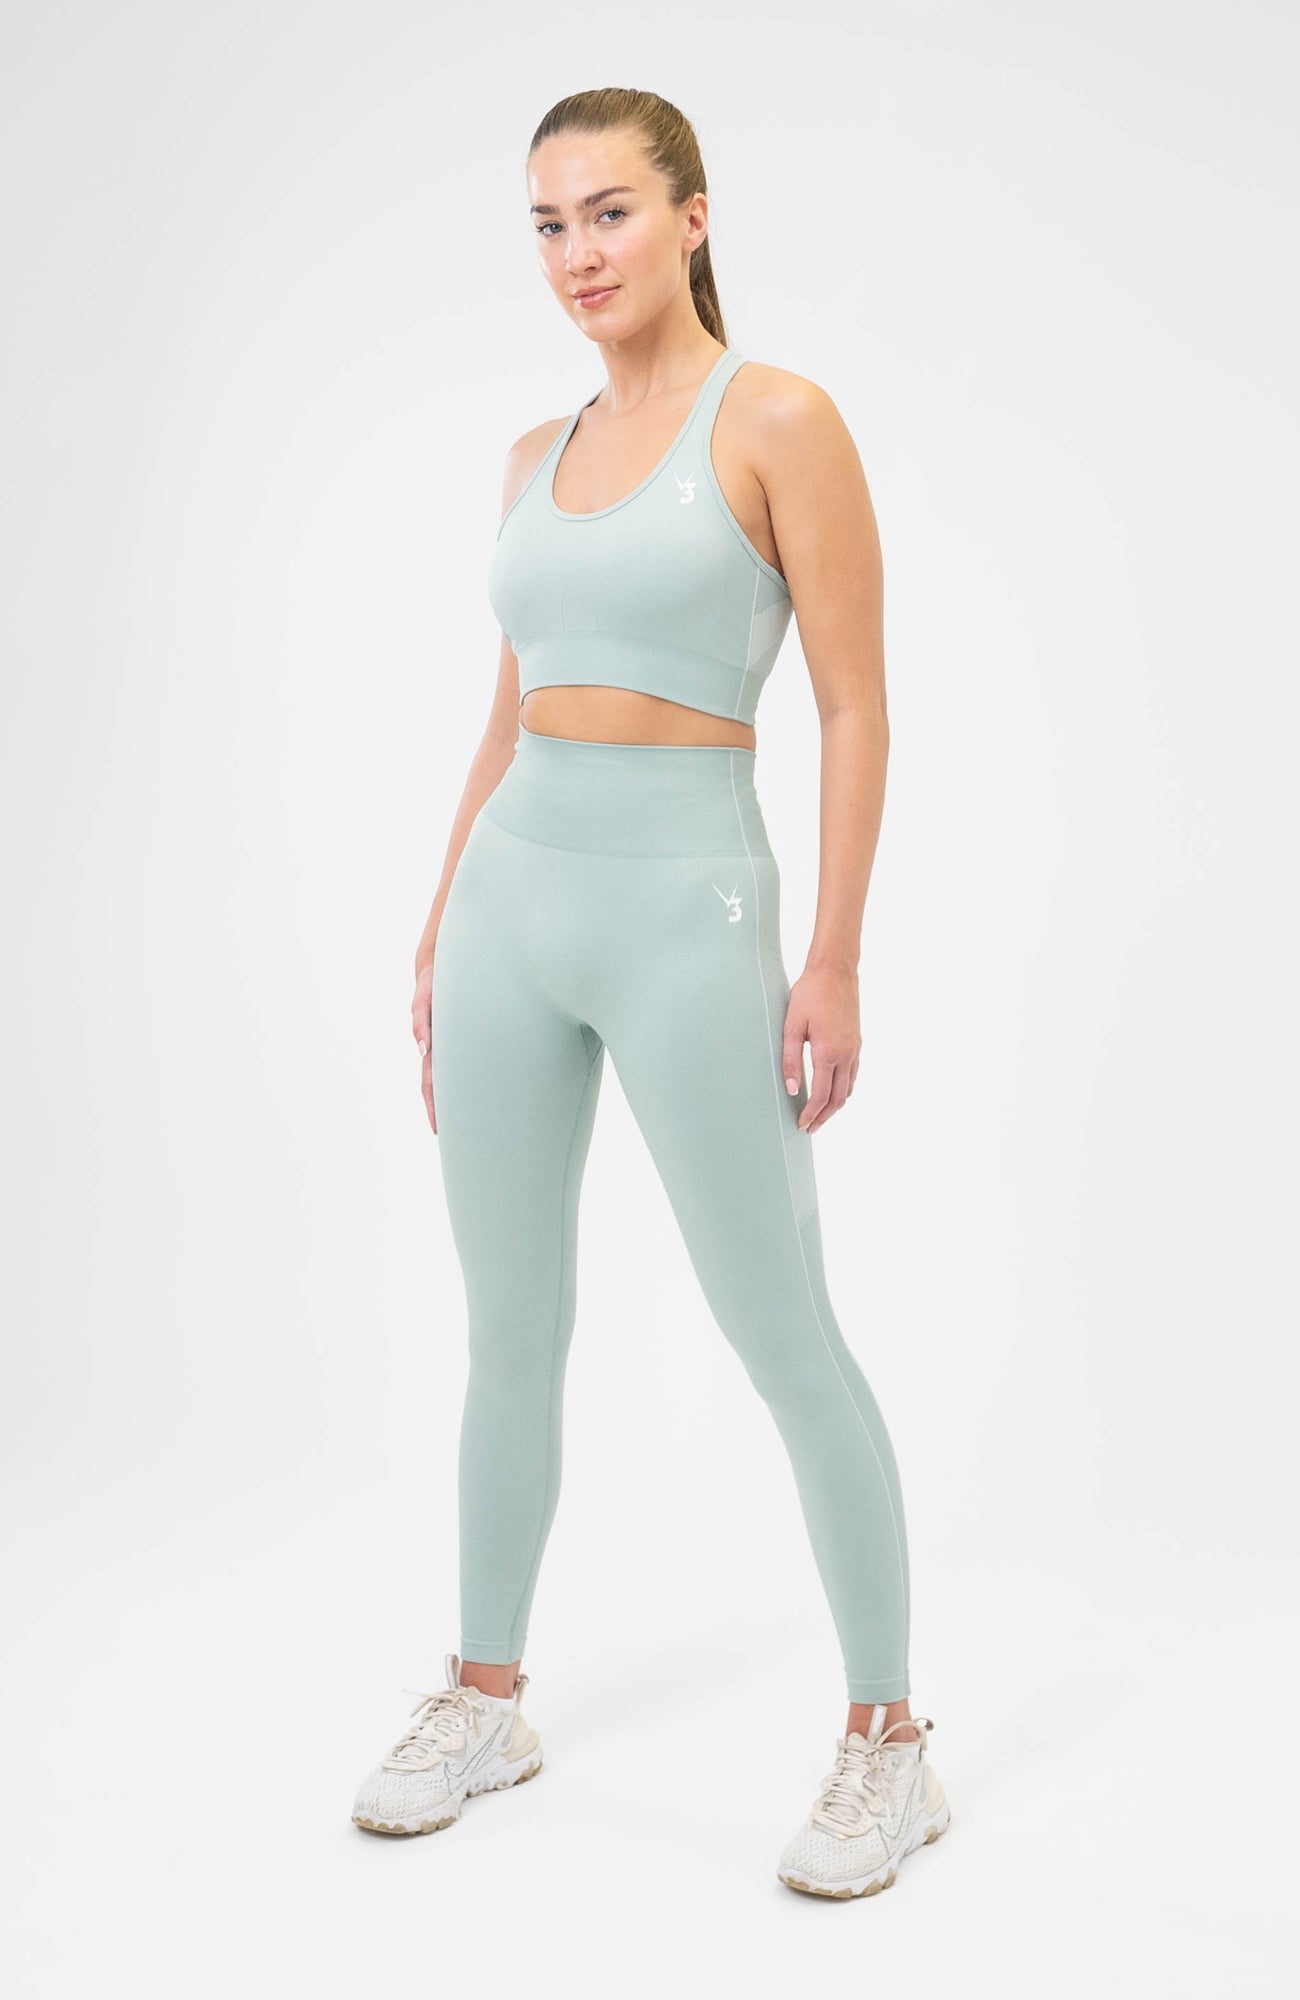 redbaysand Women's Unity seamless high waisted, bum shaping leggings in mint green – Squat proof sports tights for Gym workouts training, Running, yoga, bodybuilding and bikini fitness.